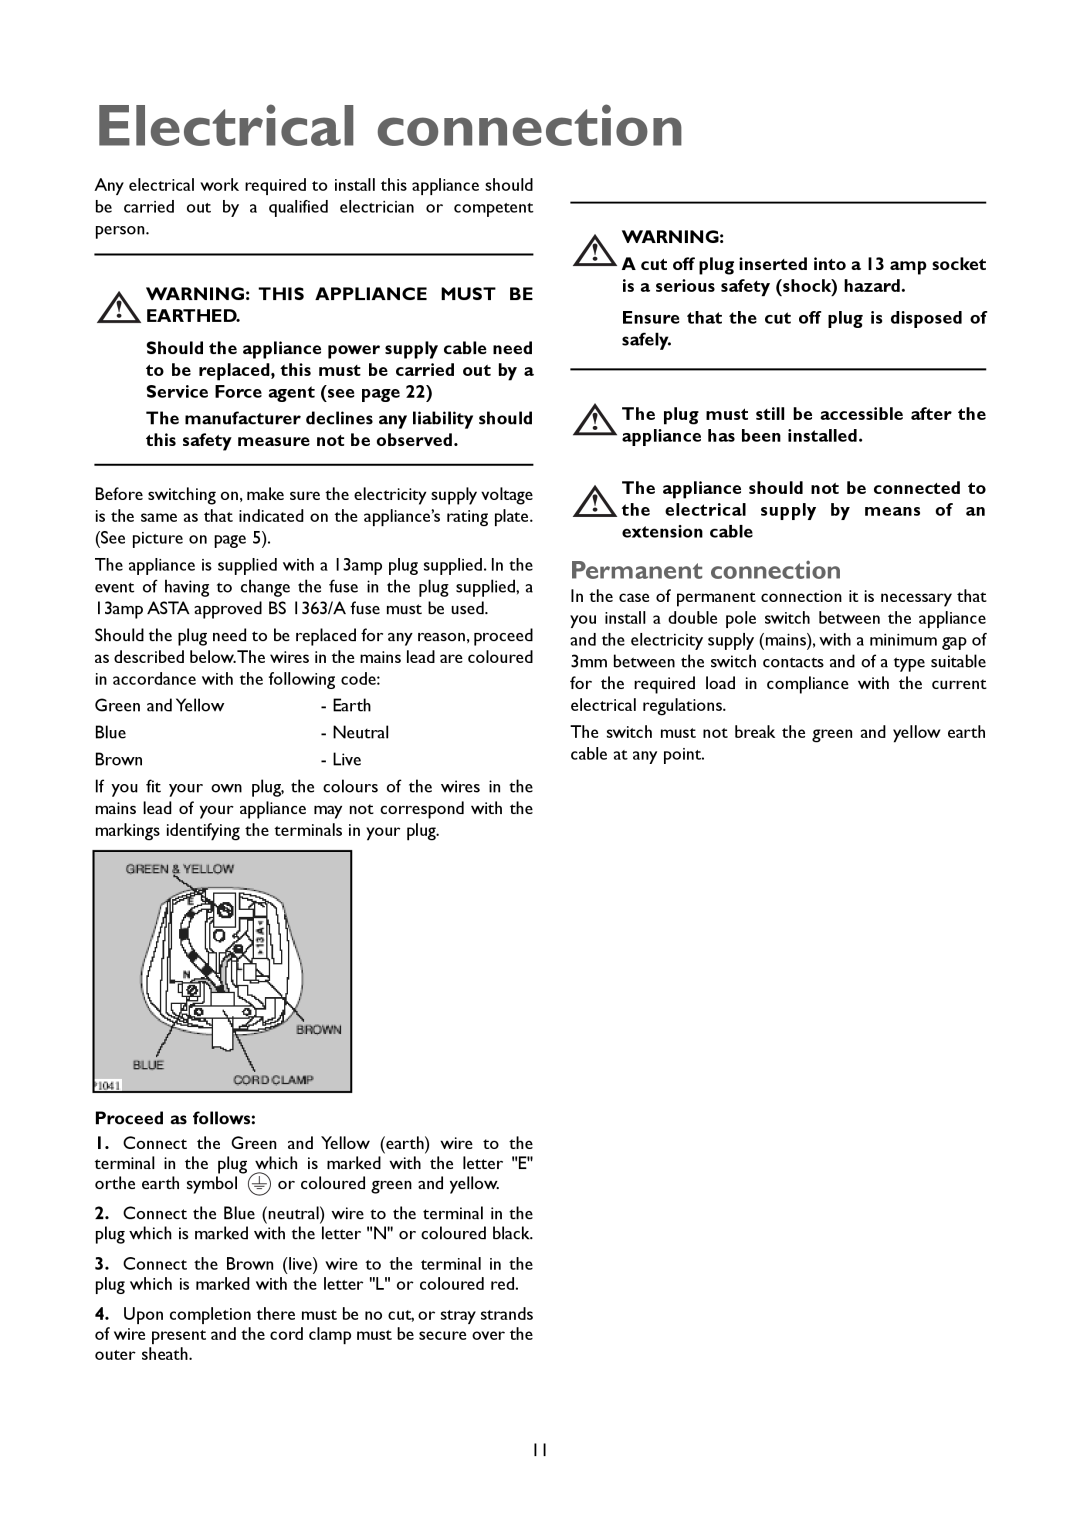 John Lewis JLFFW2005 instruction manual Electrical connection, Permanent connection 